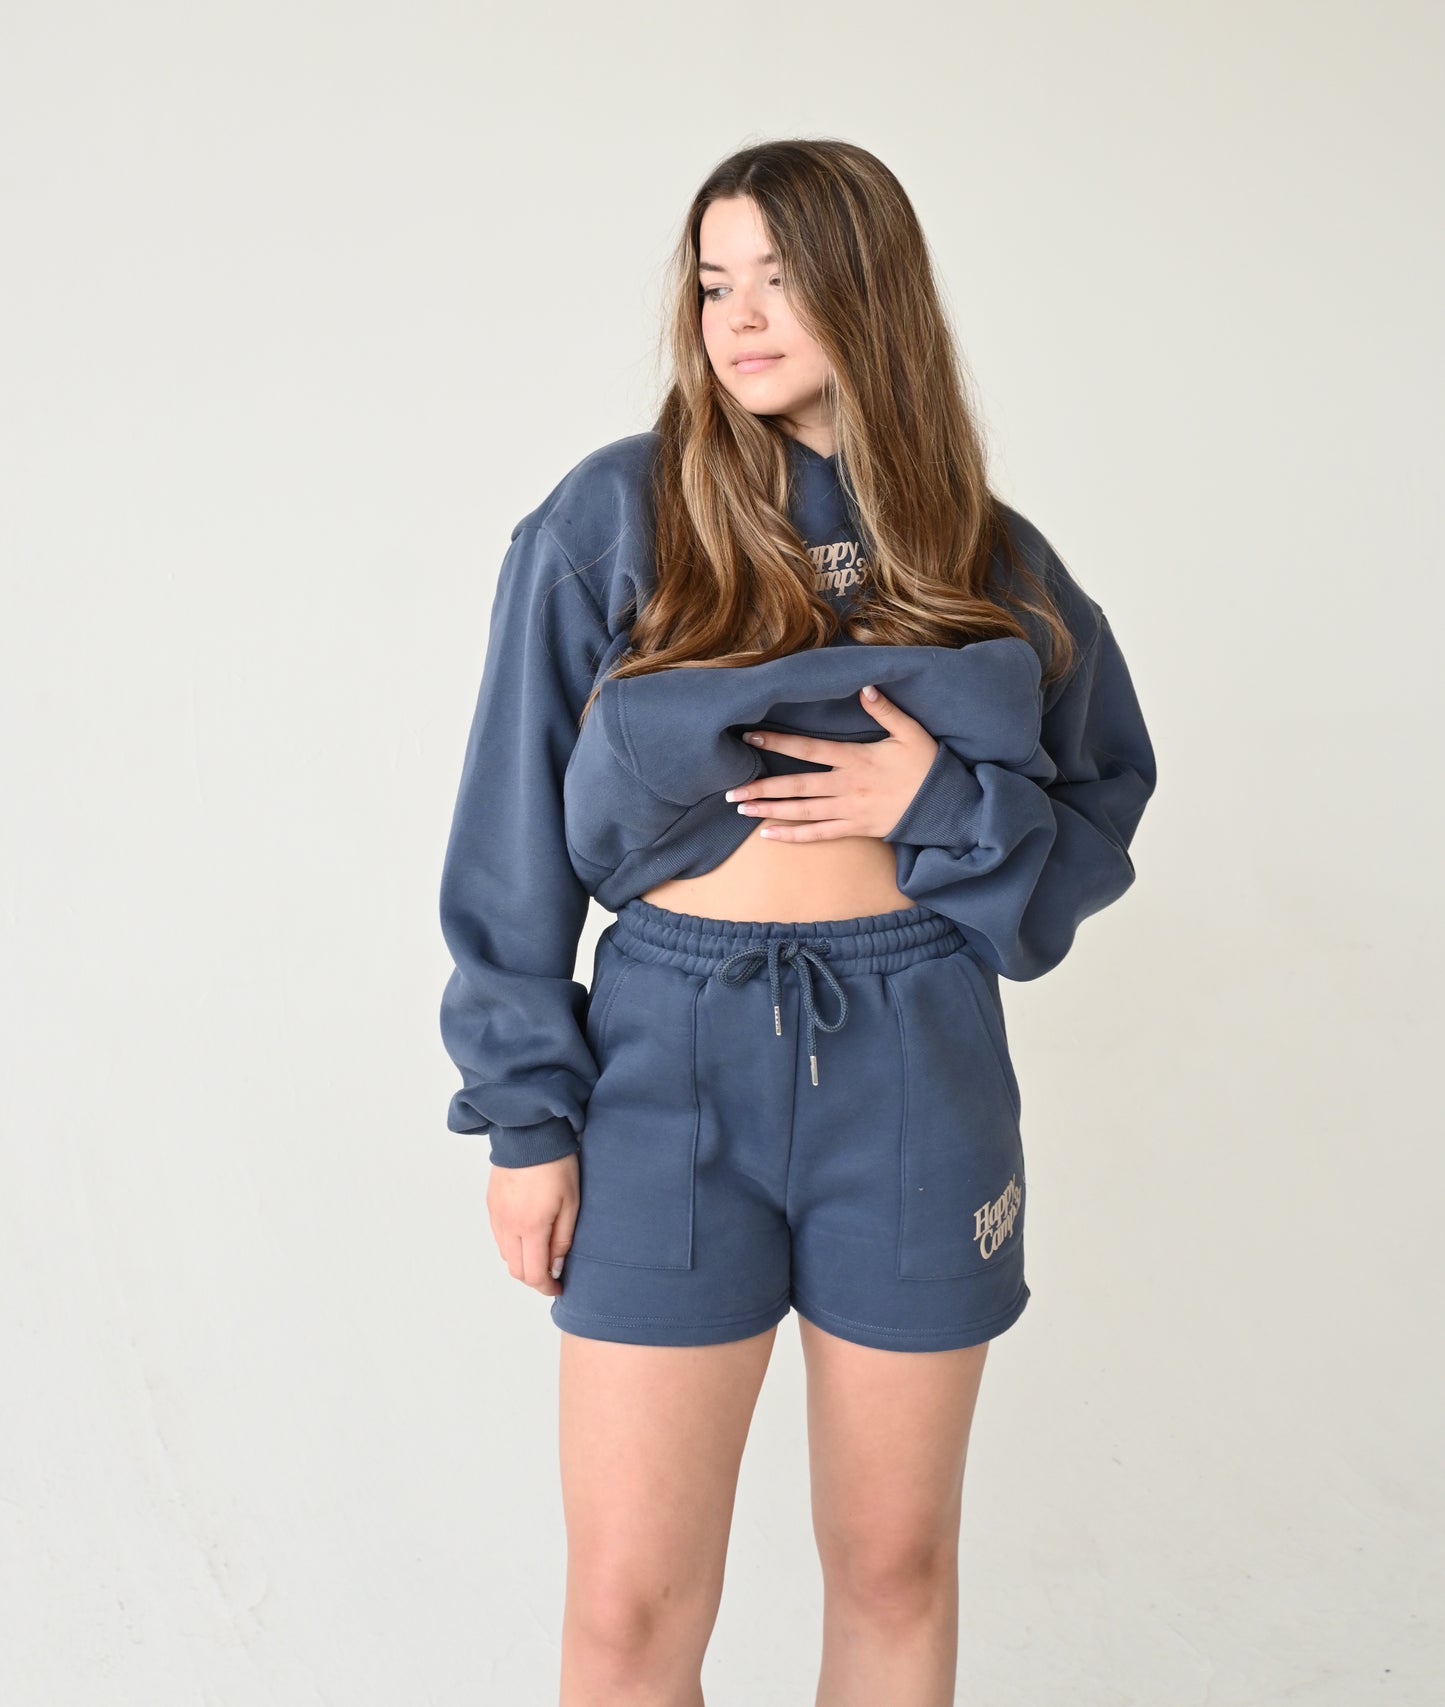 Disrupt Anxiety with Gratitude Shorts - Midnight Blue